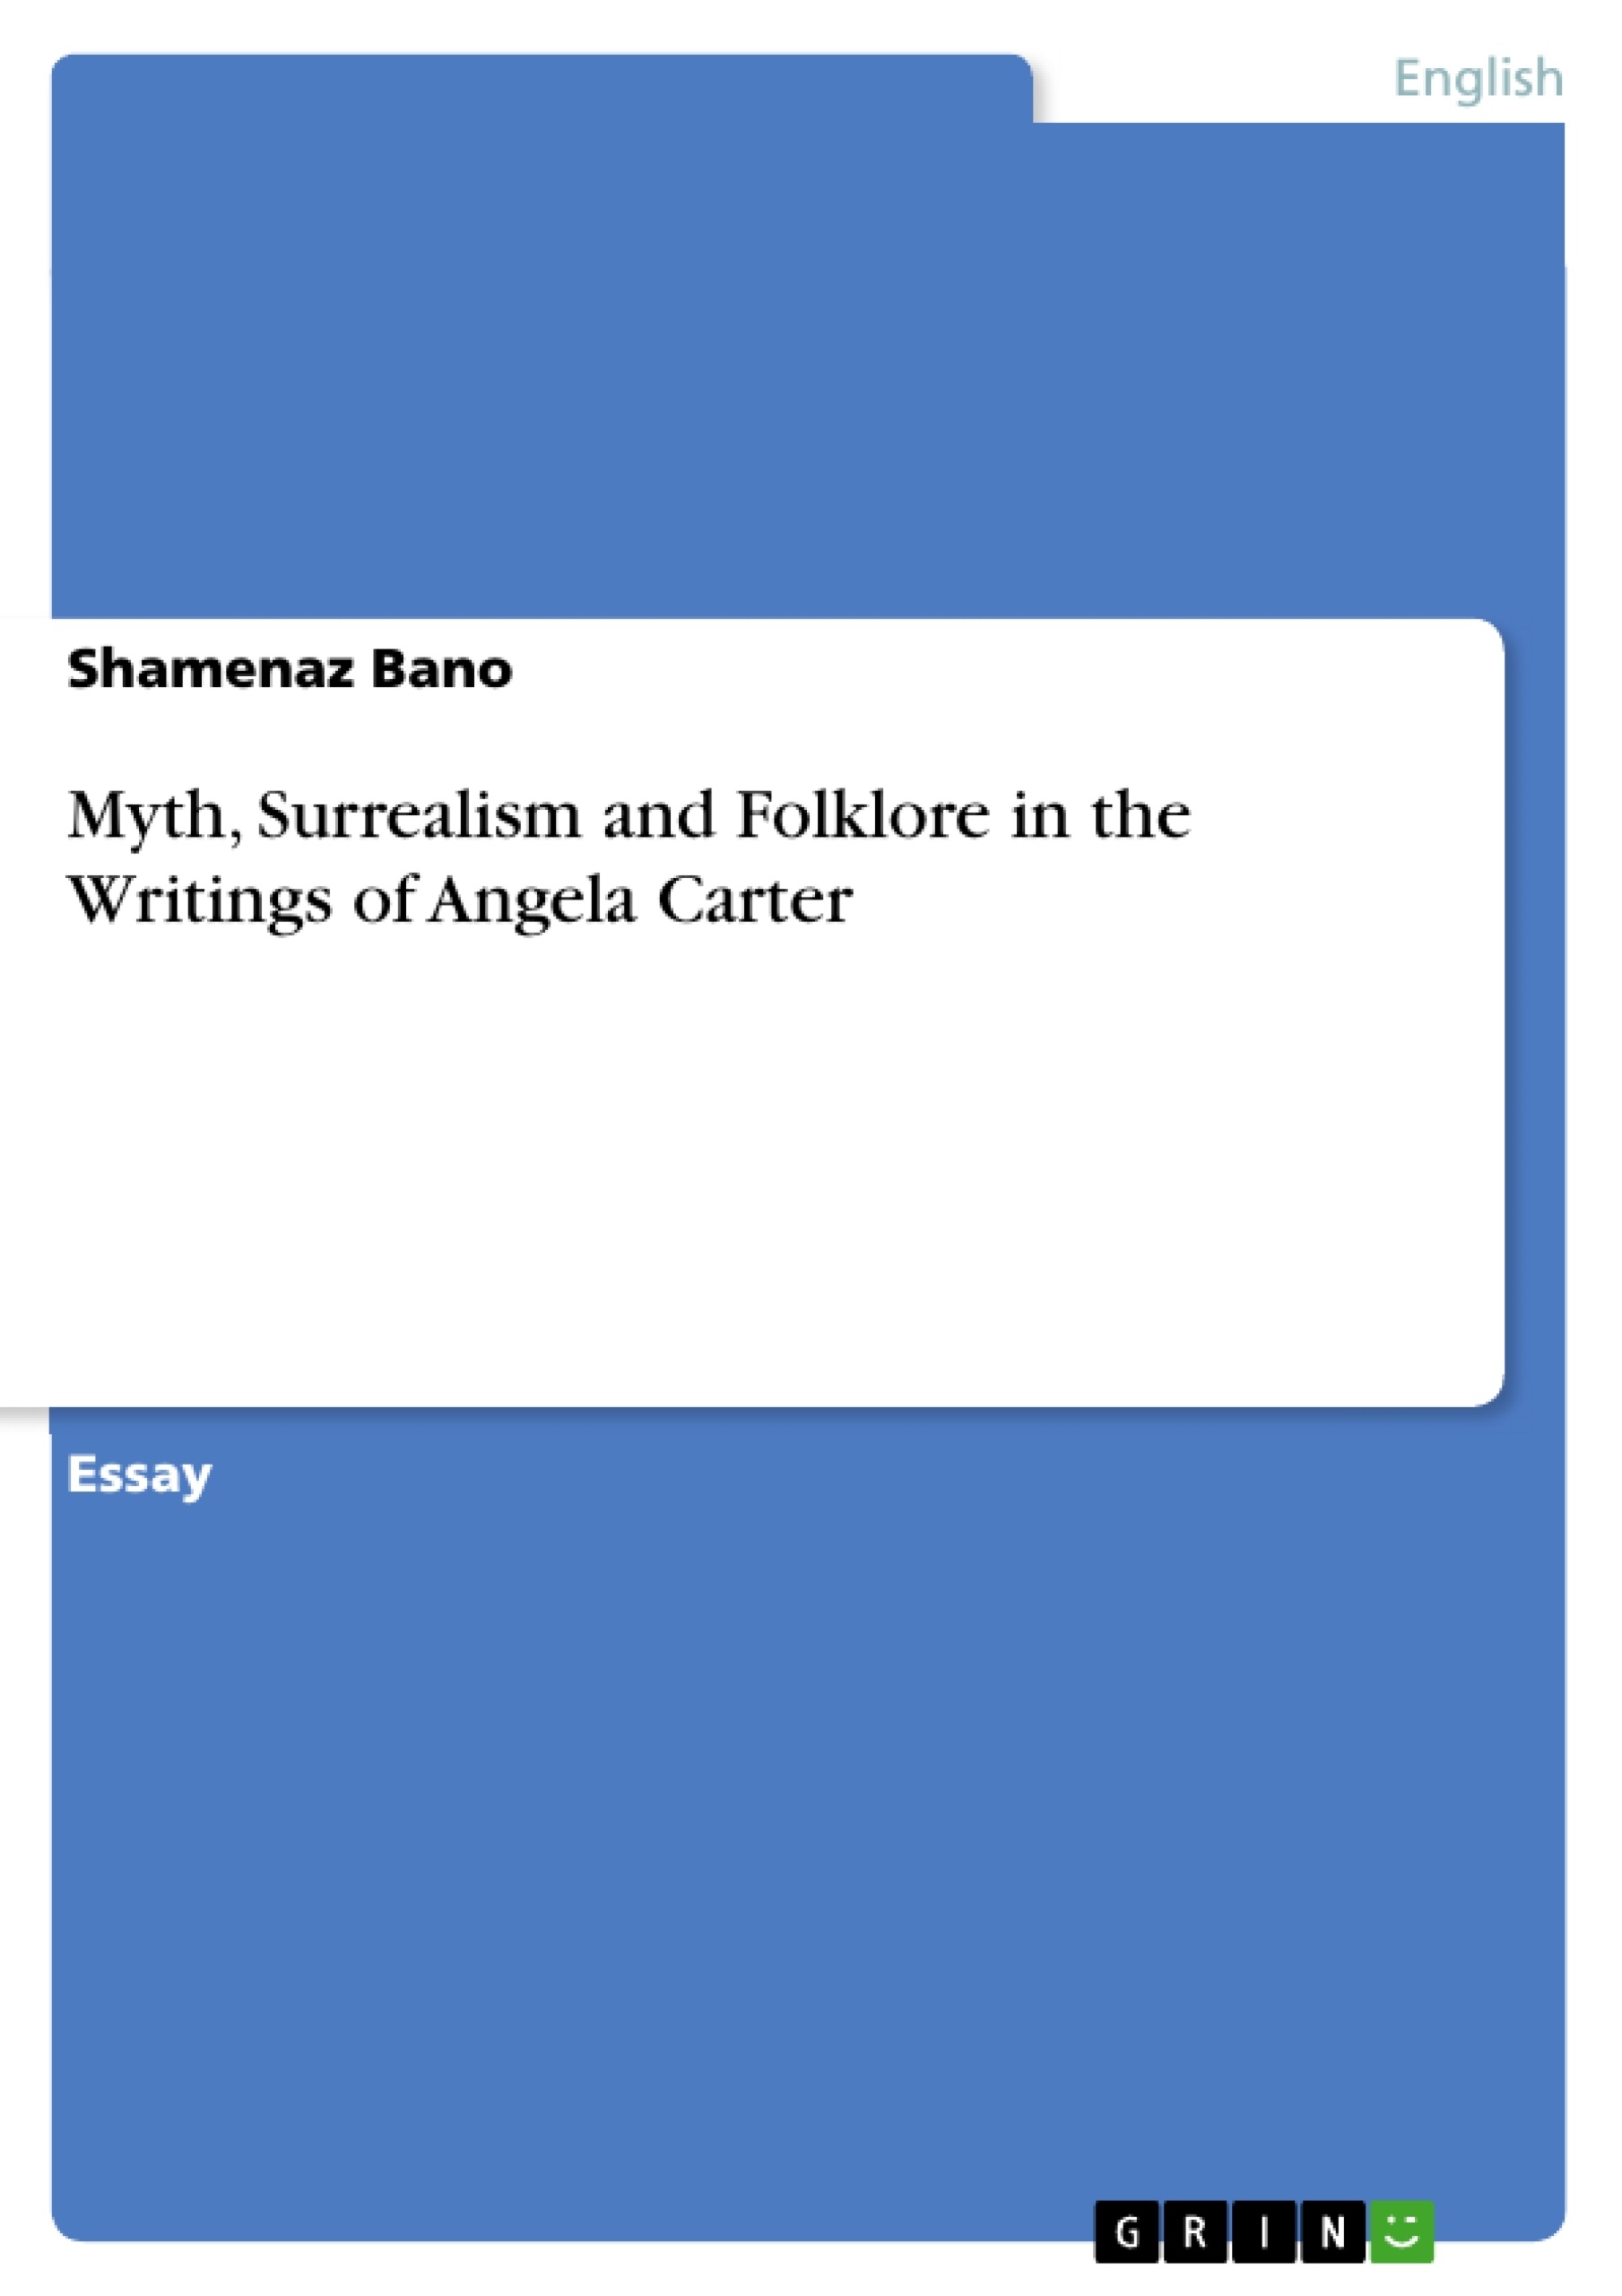 Title: Myth, Surrealism and Folklore in the Writings of Angela Carter